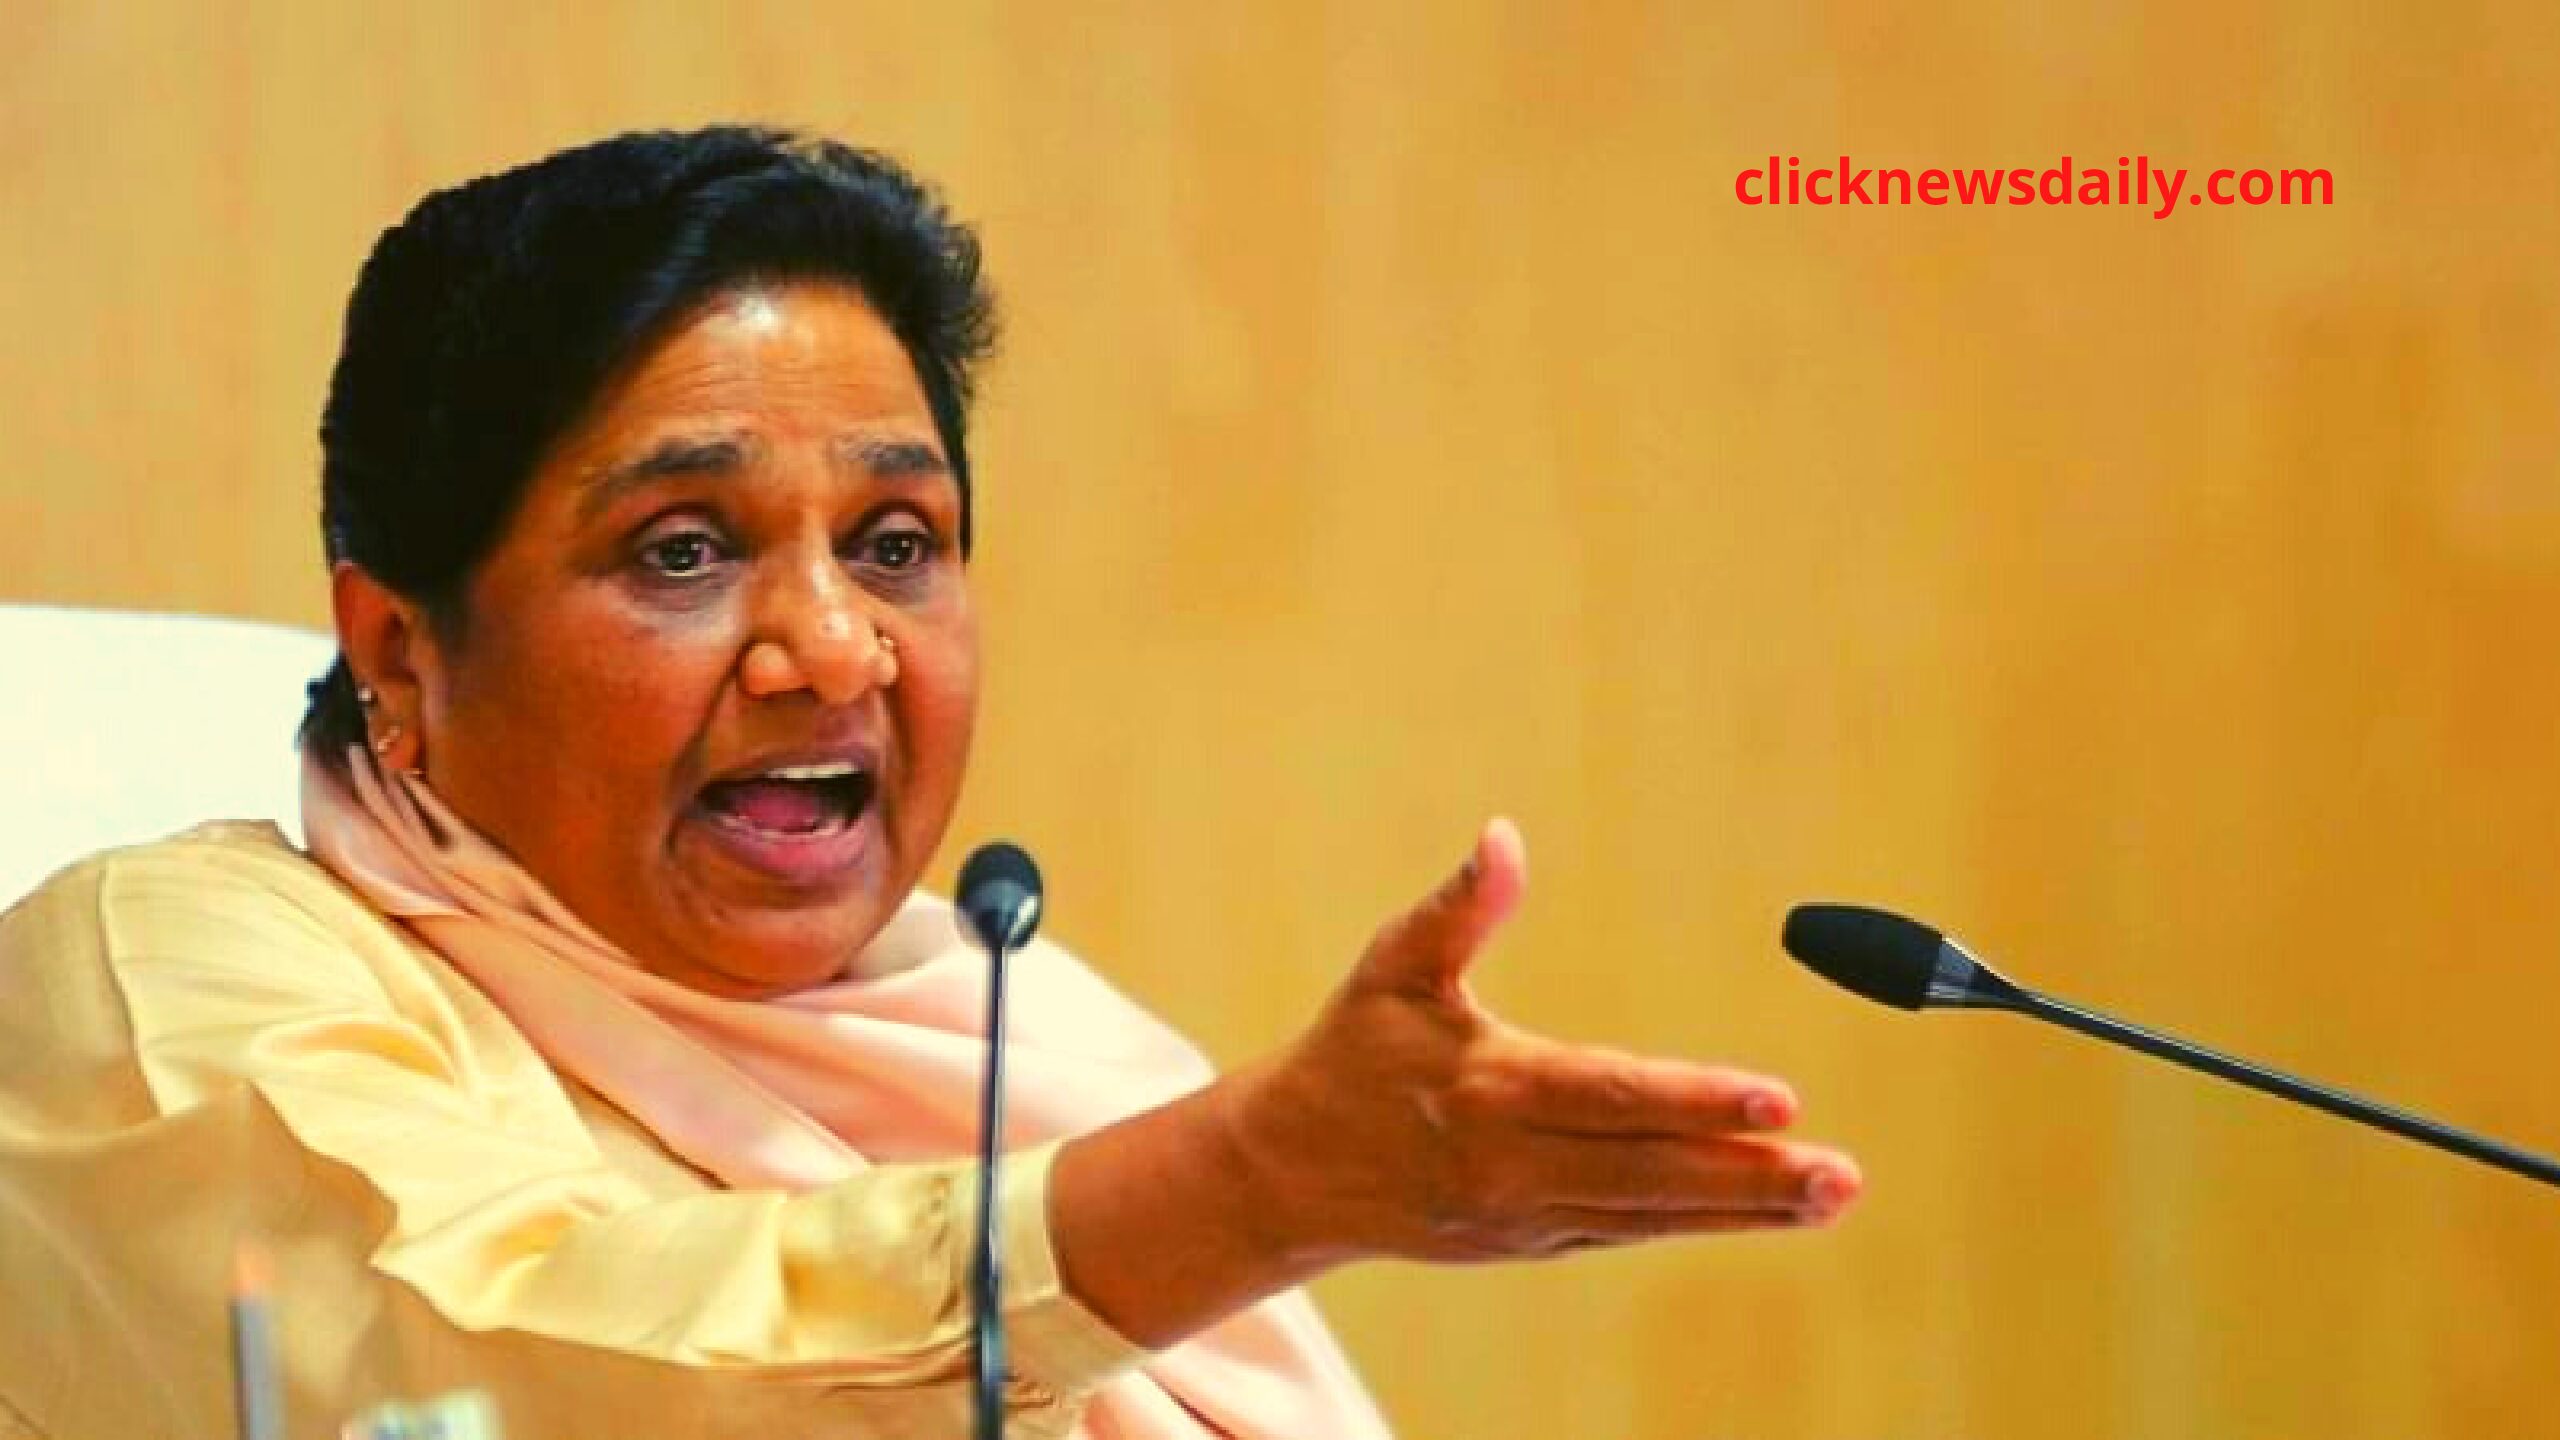 EC should ban pre-poll surveys by media outlets 6 months before elections: Mayawati